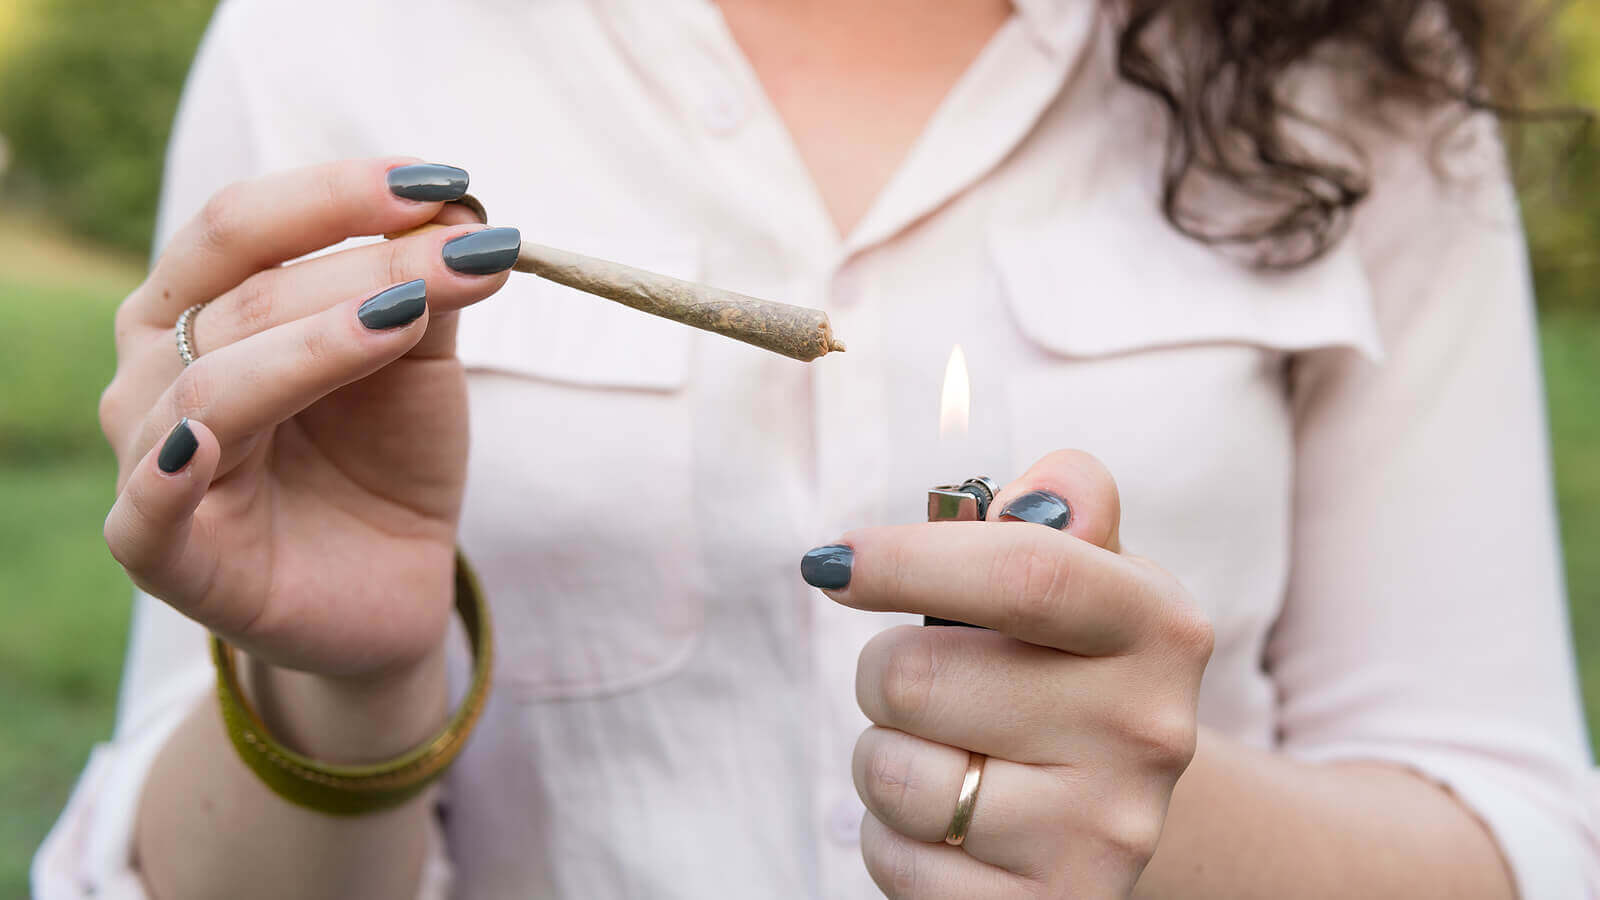 A woman lighting a joint.